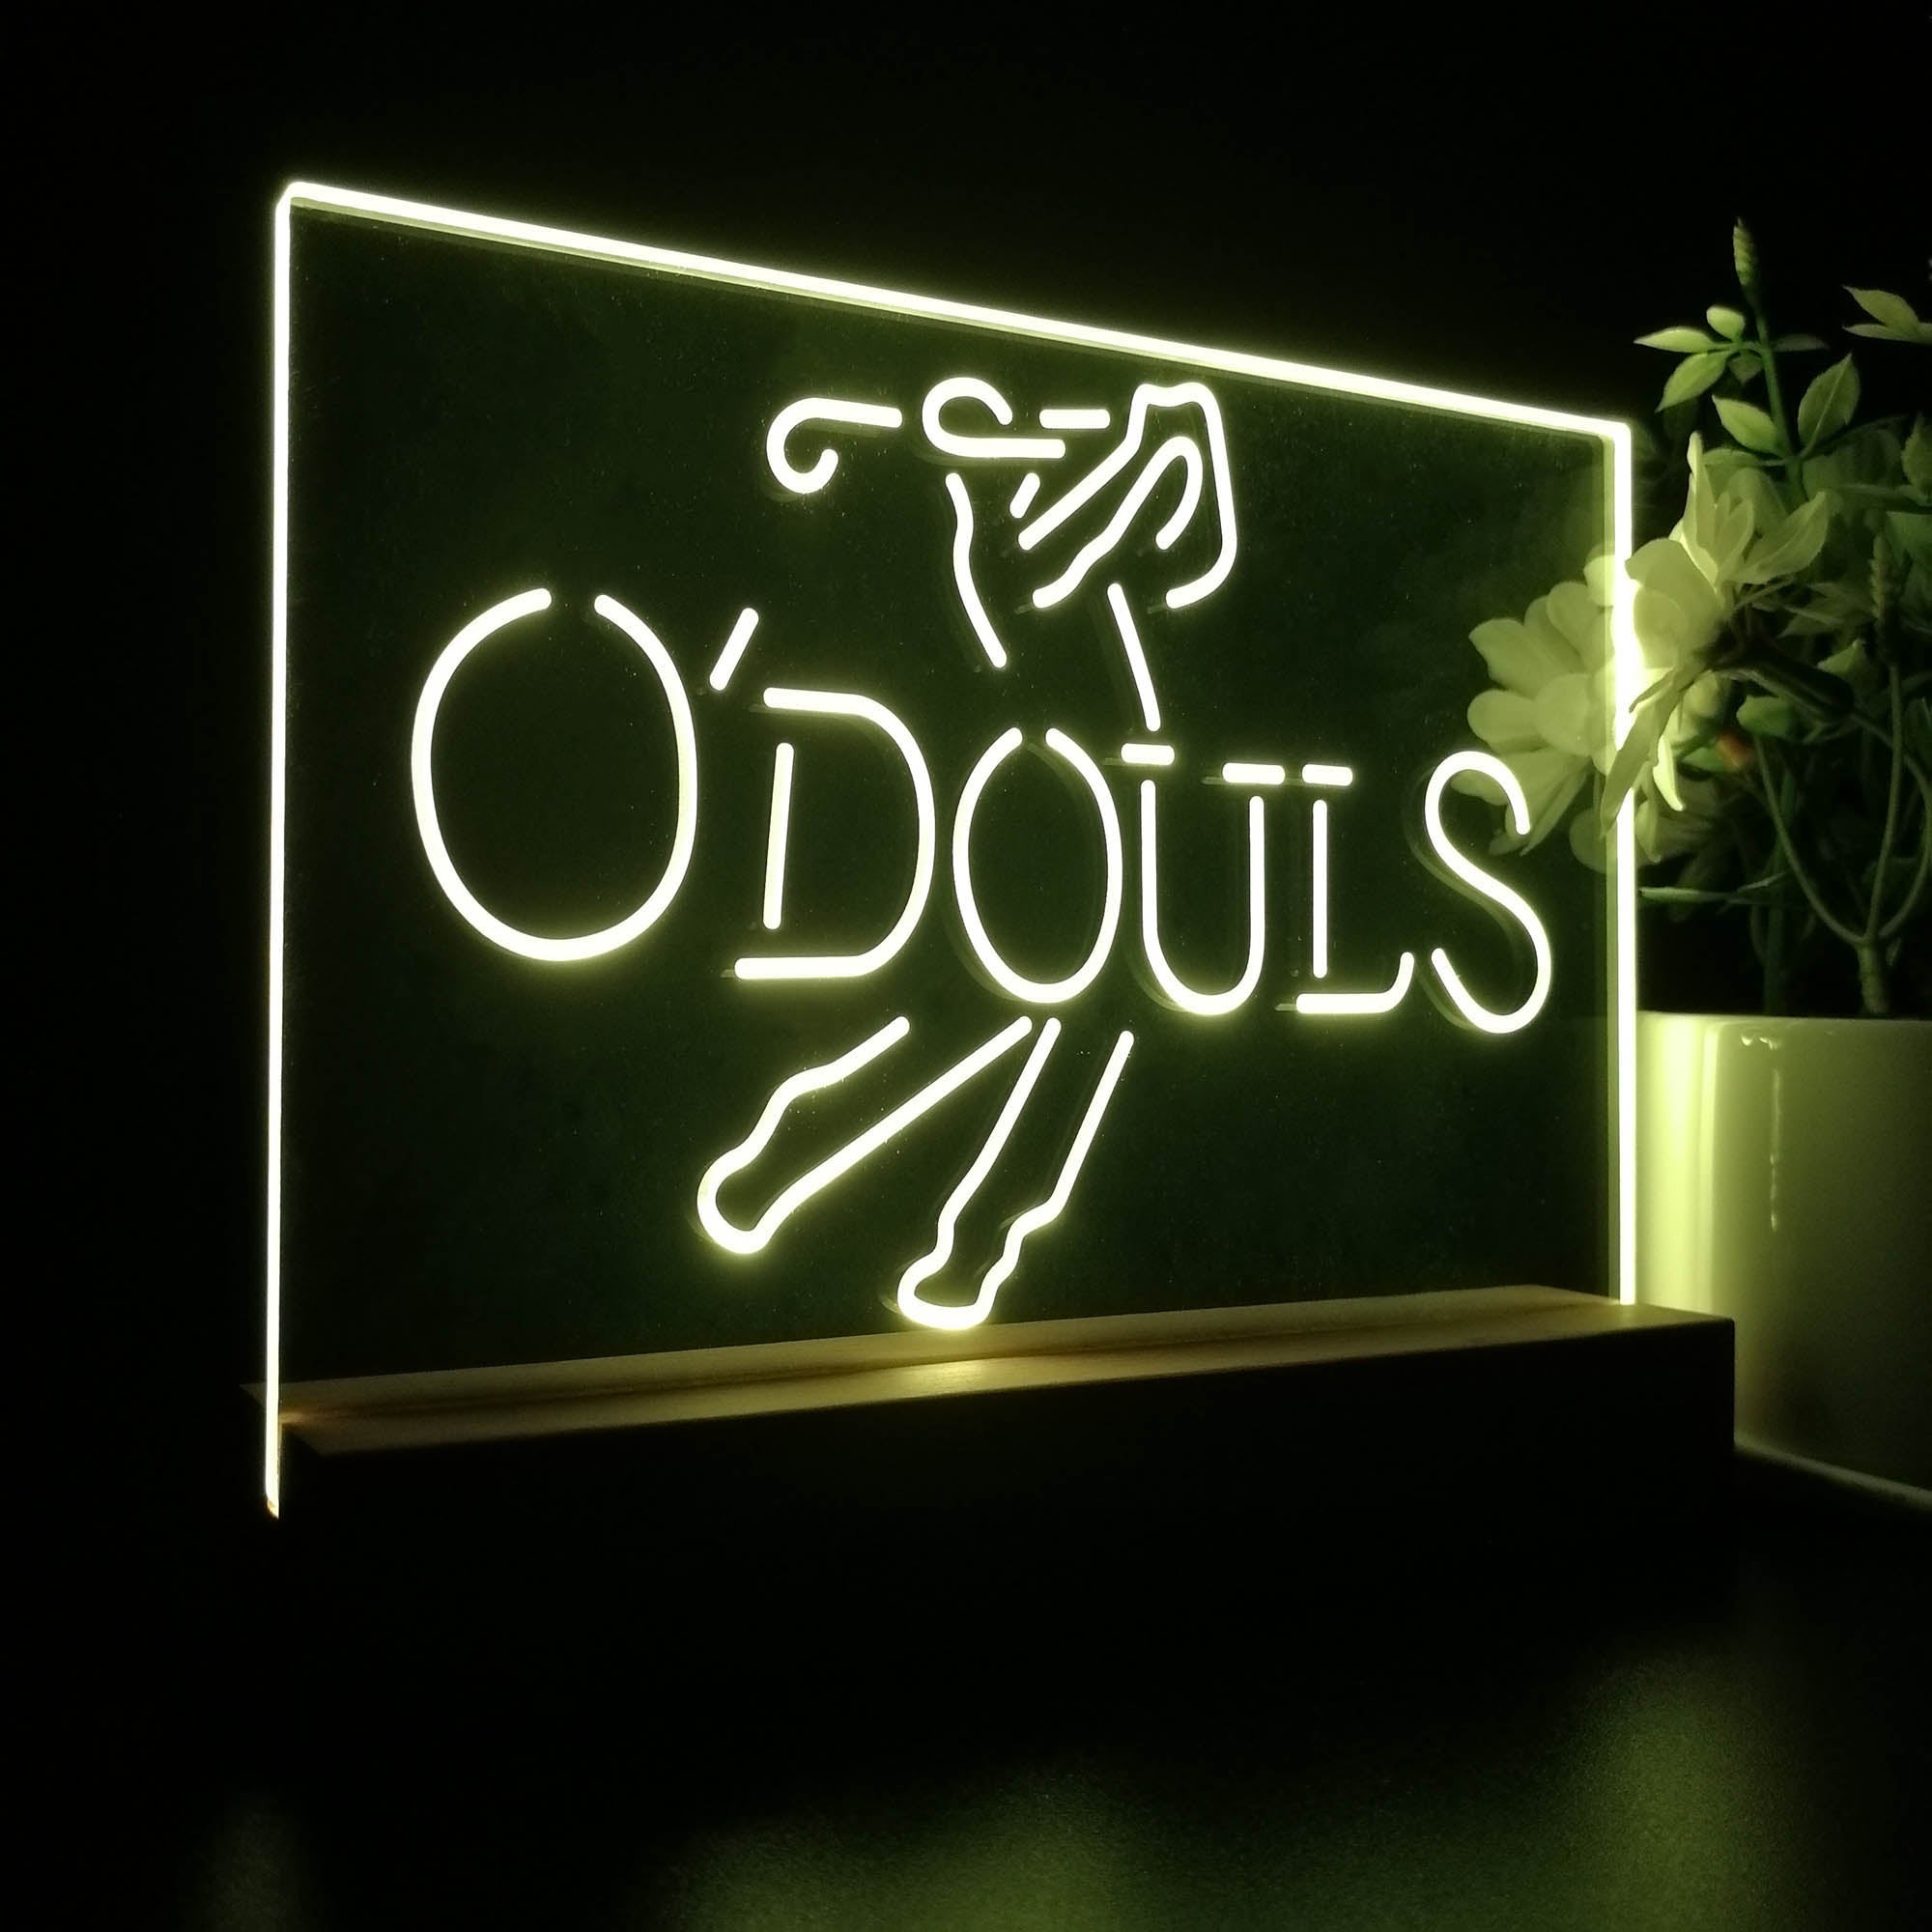 O'Doul's Beer Golfer Neon Sign Pub Bar Lamp